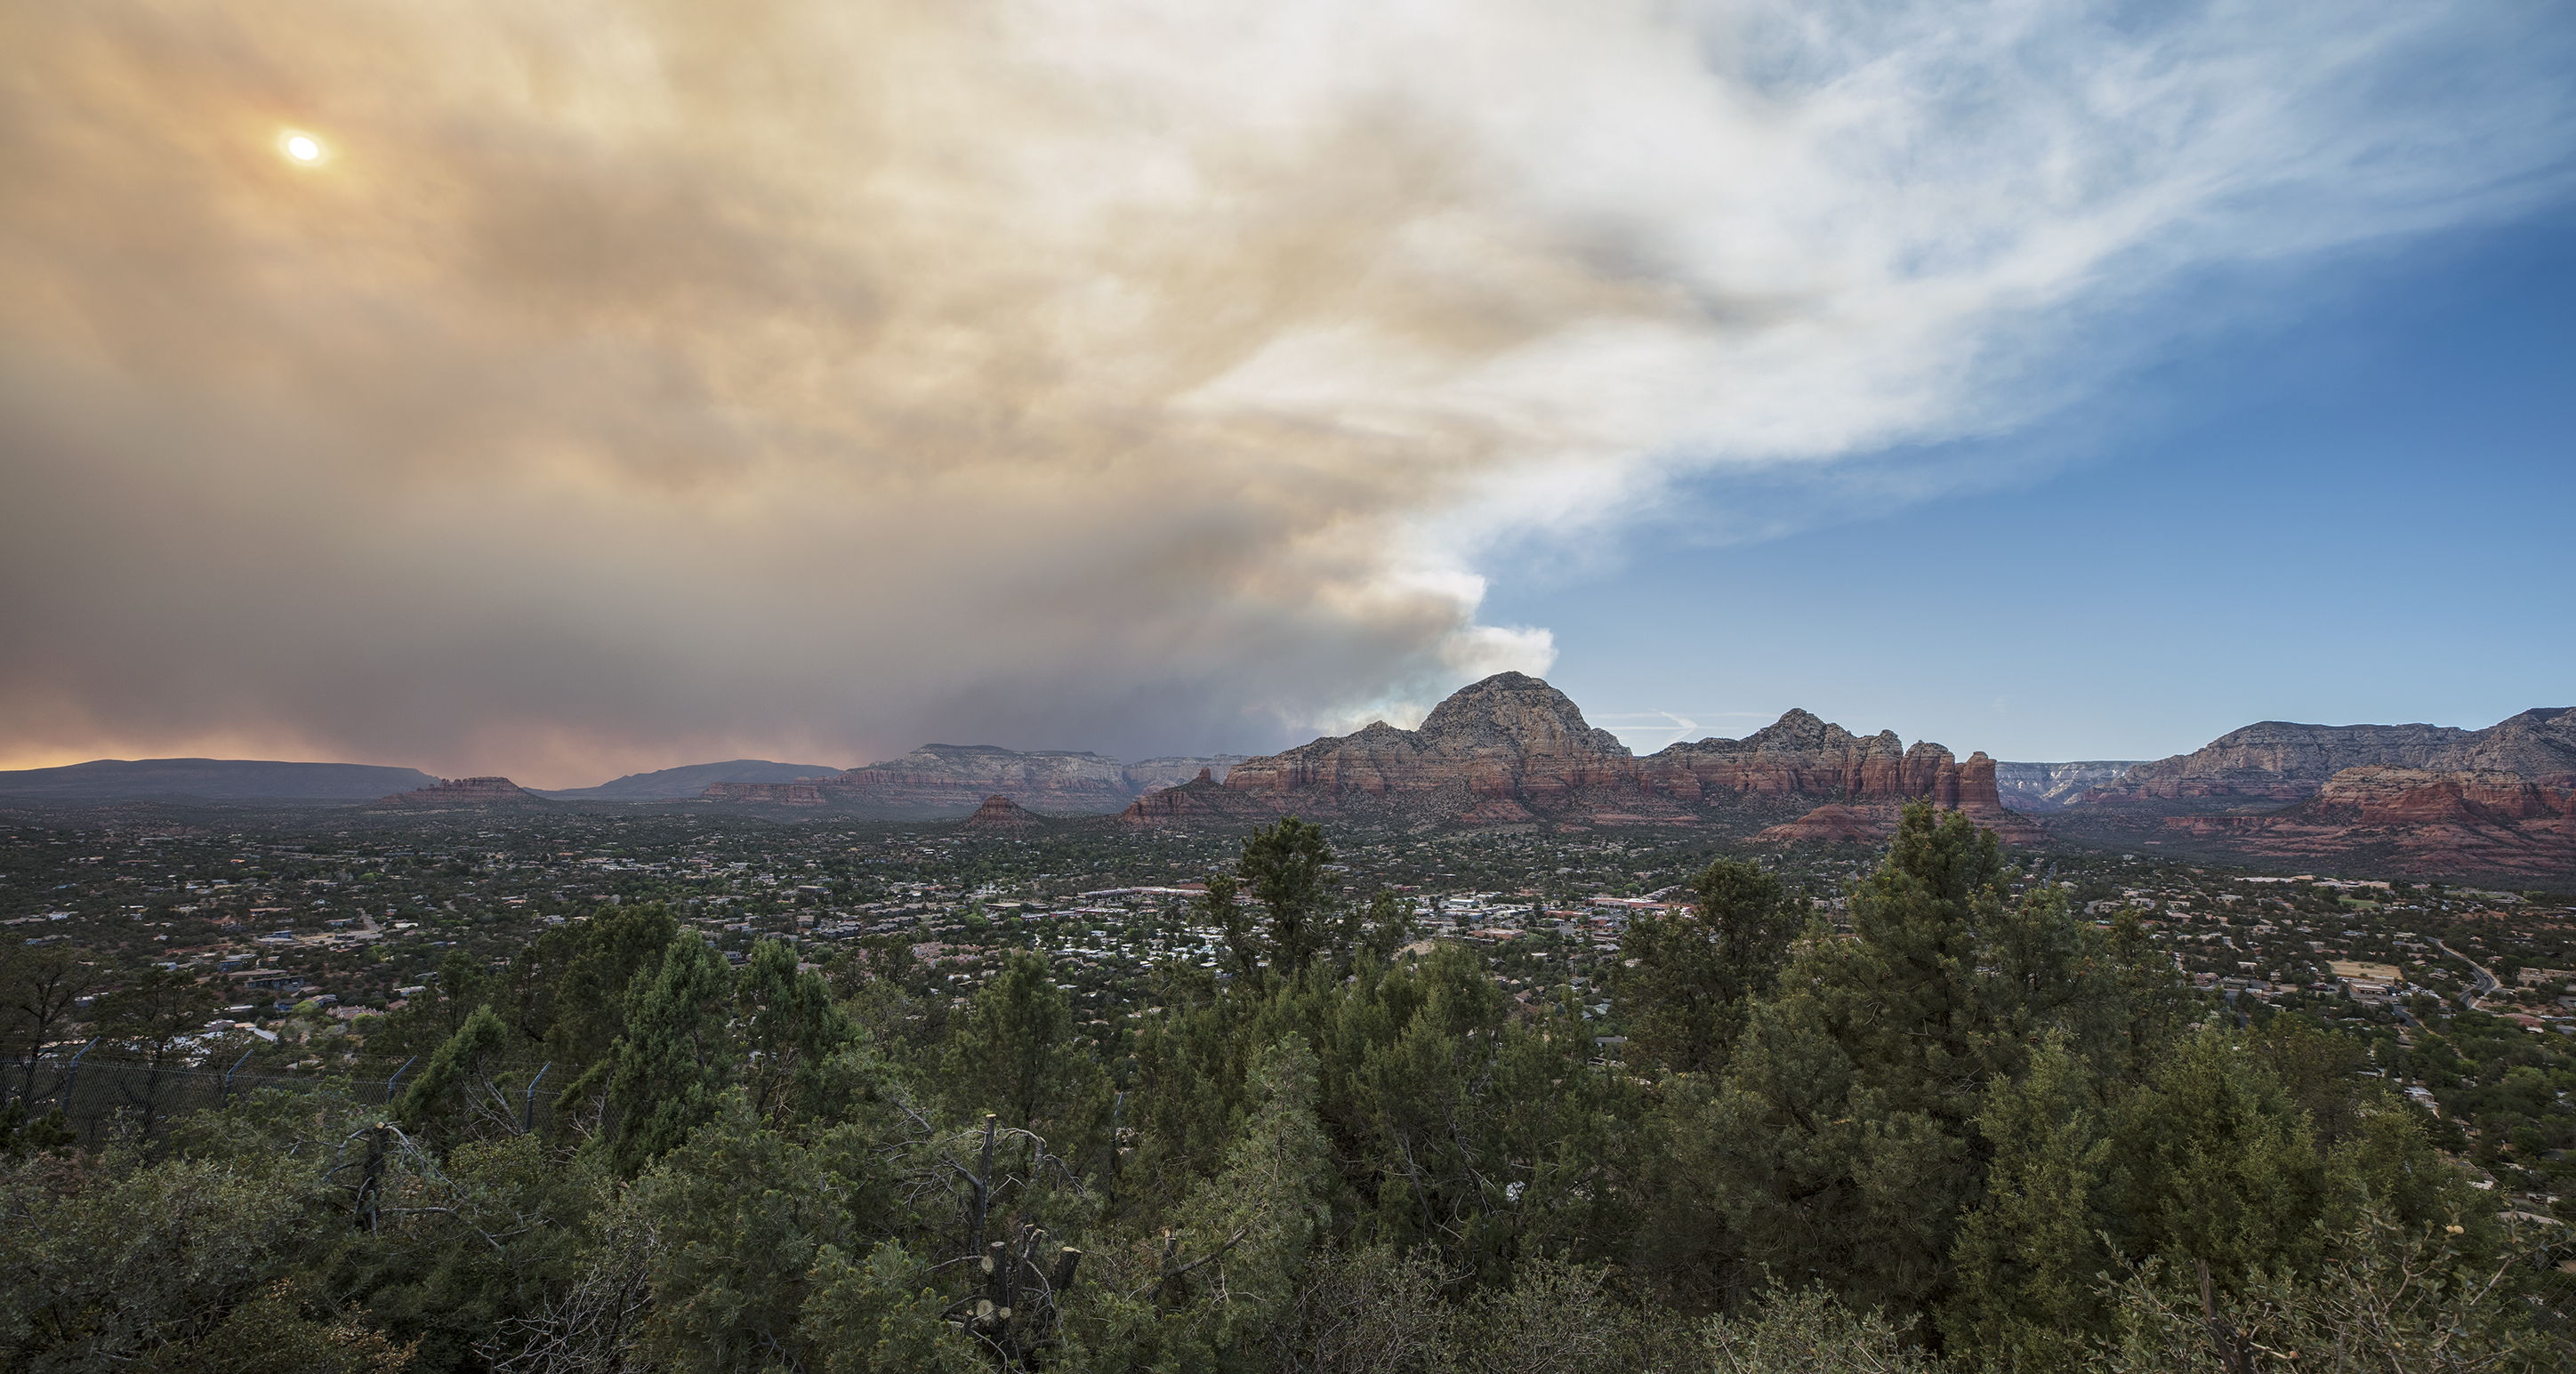 Sedona during the fires